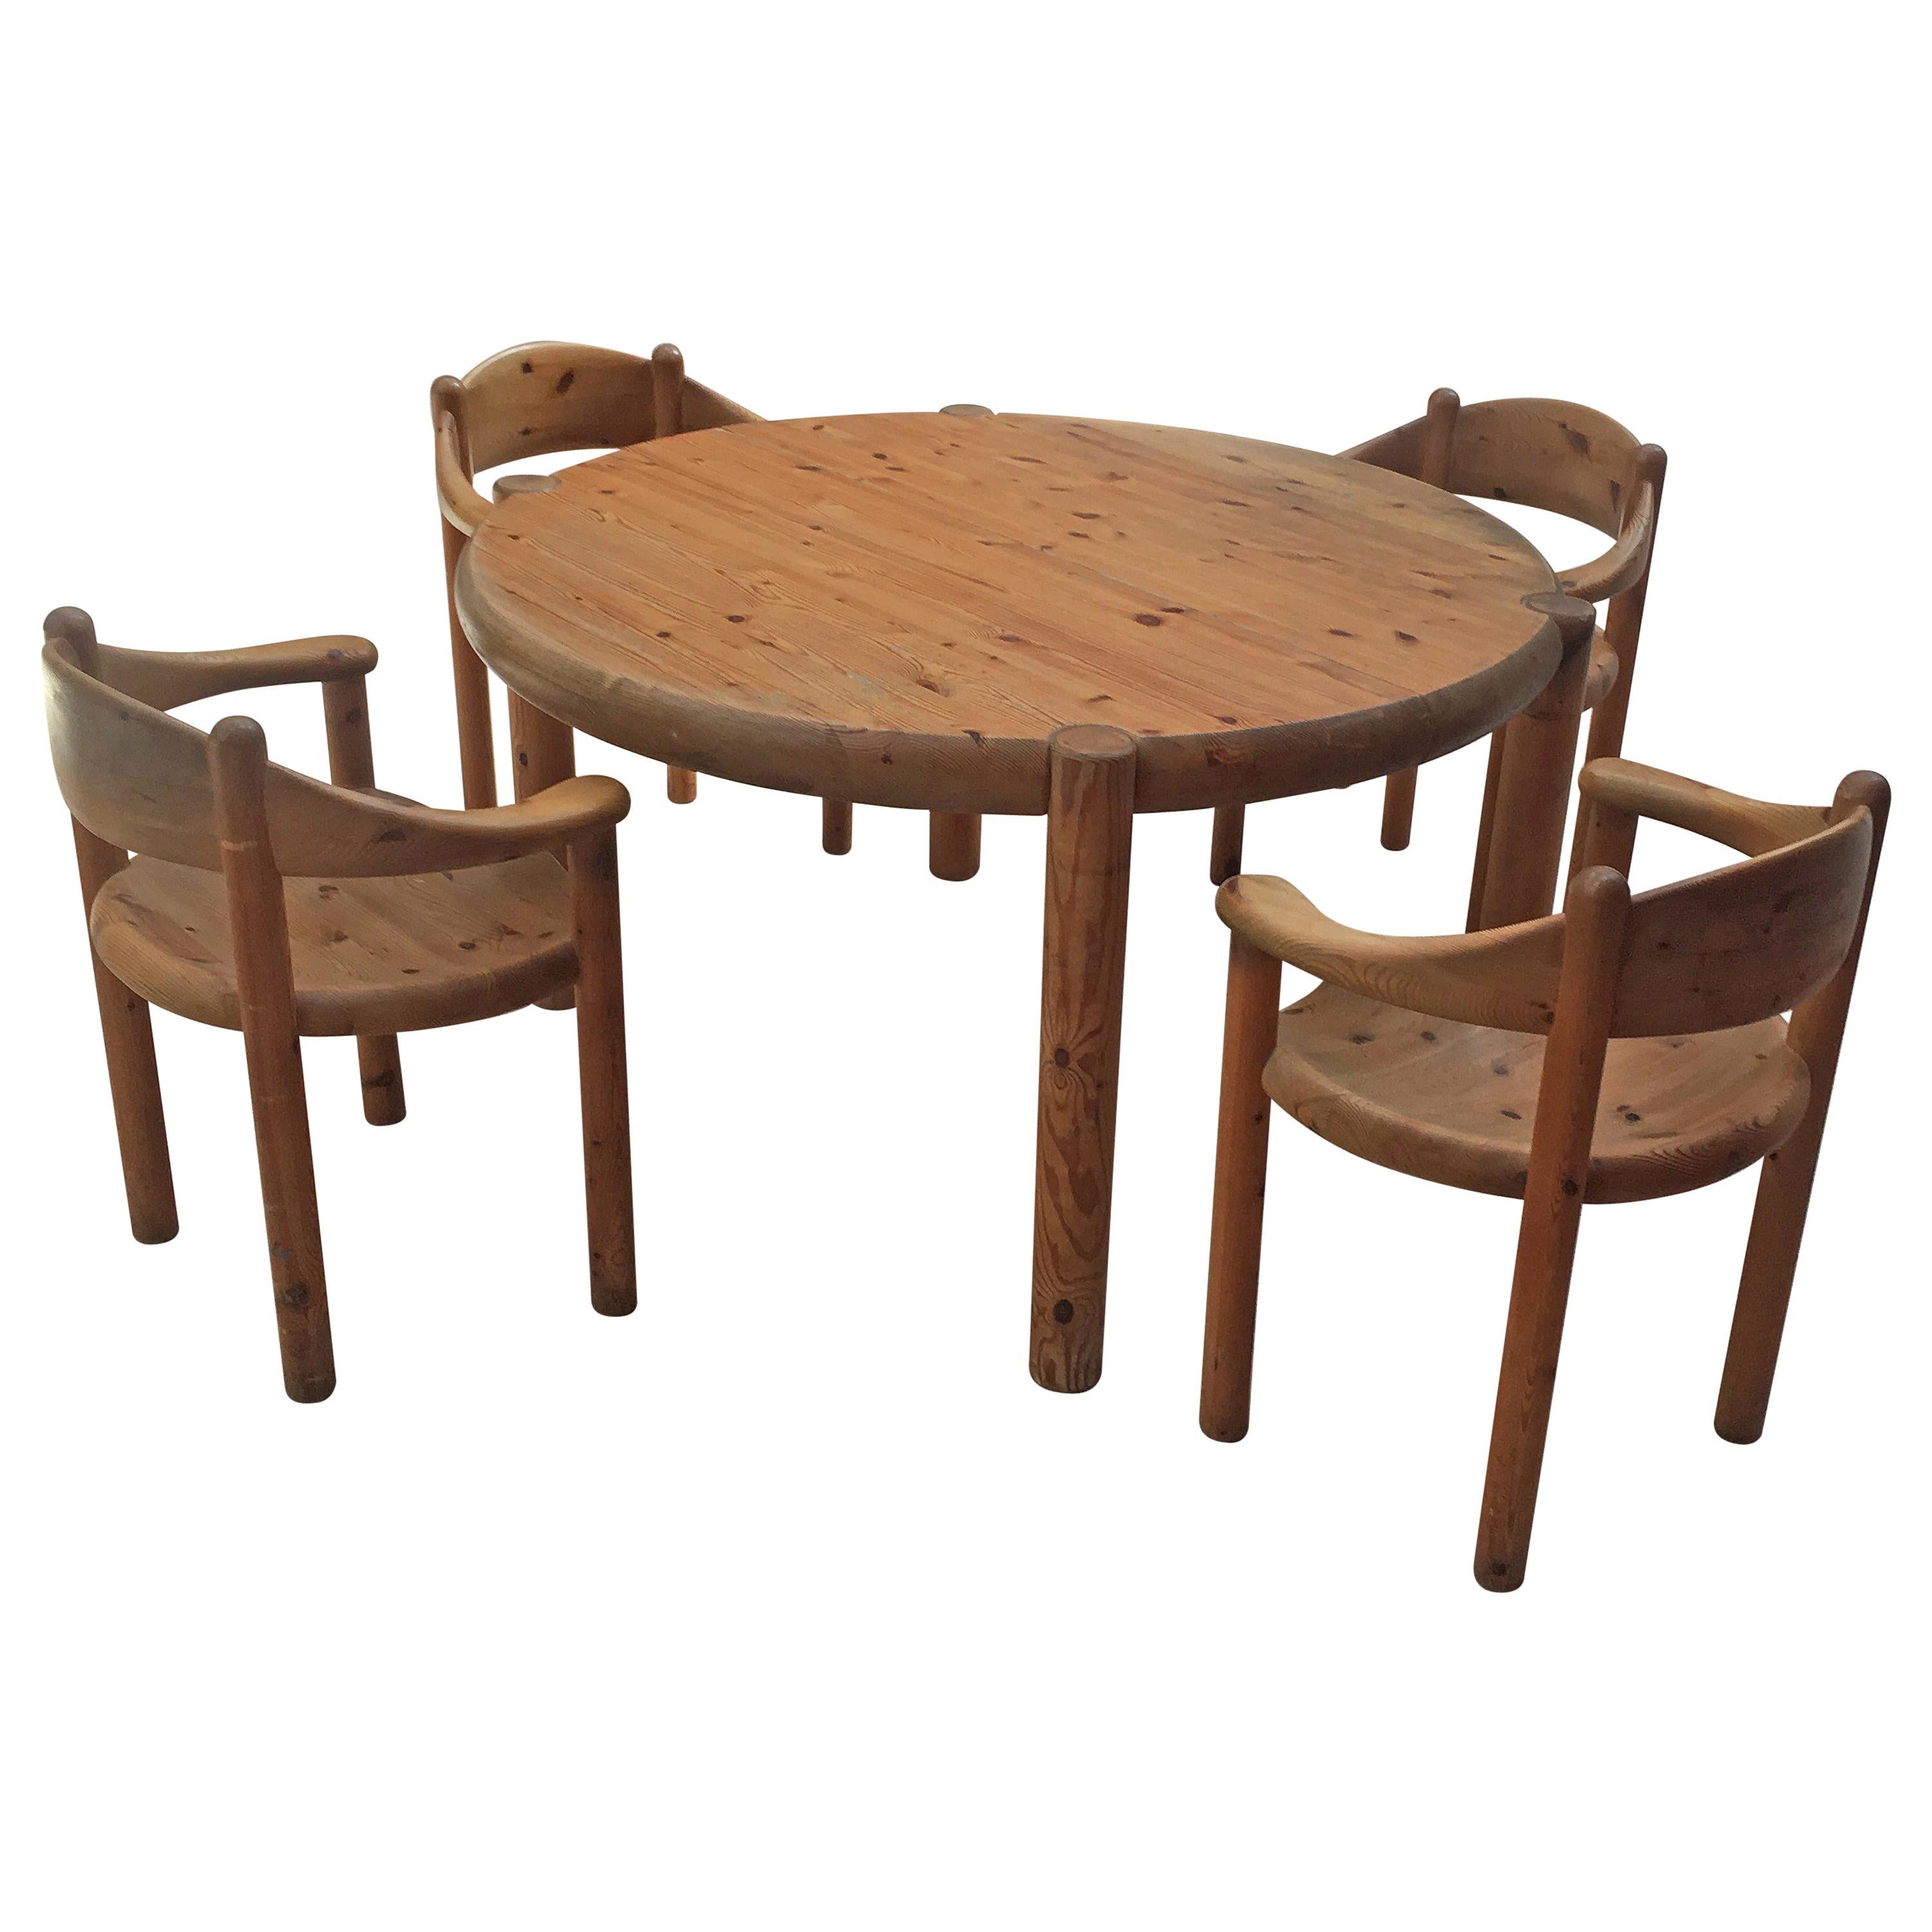 Rainer Daumiller, Set of 4 Chairs and 1 Table for Hirtshals Savvaerk, circa 1970